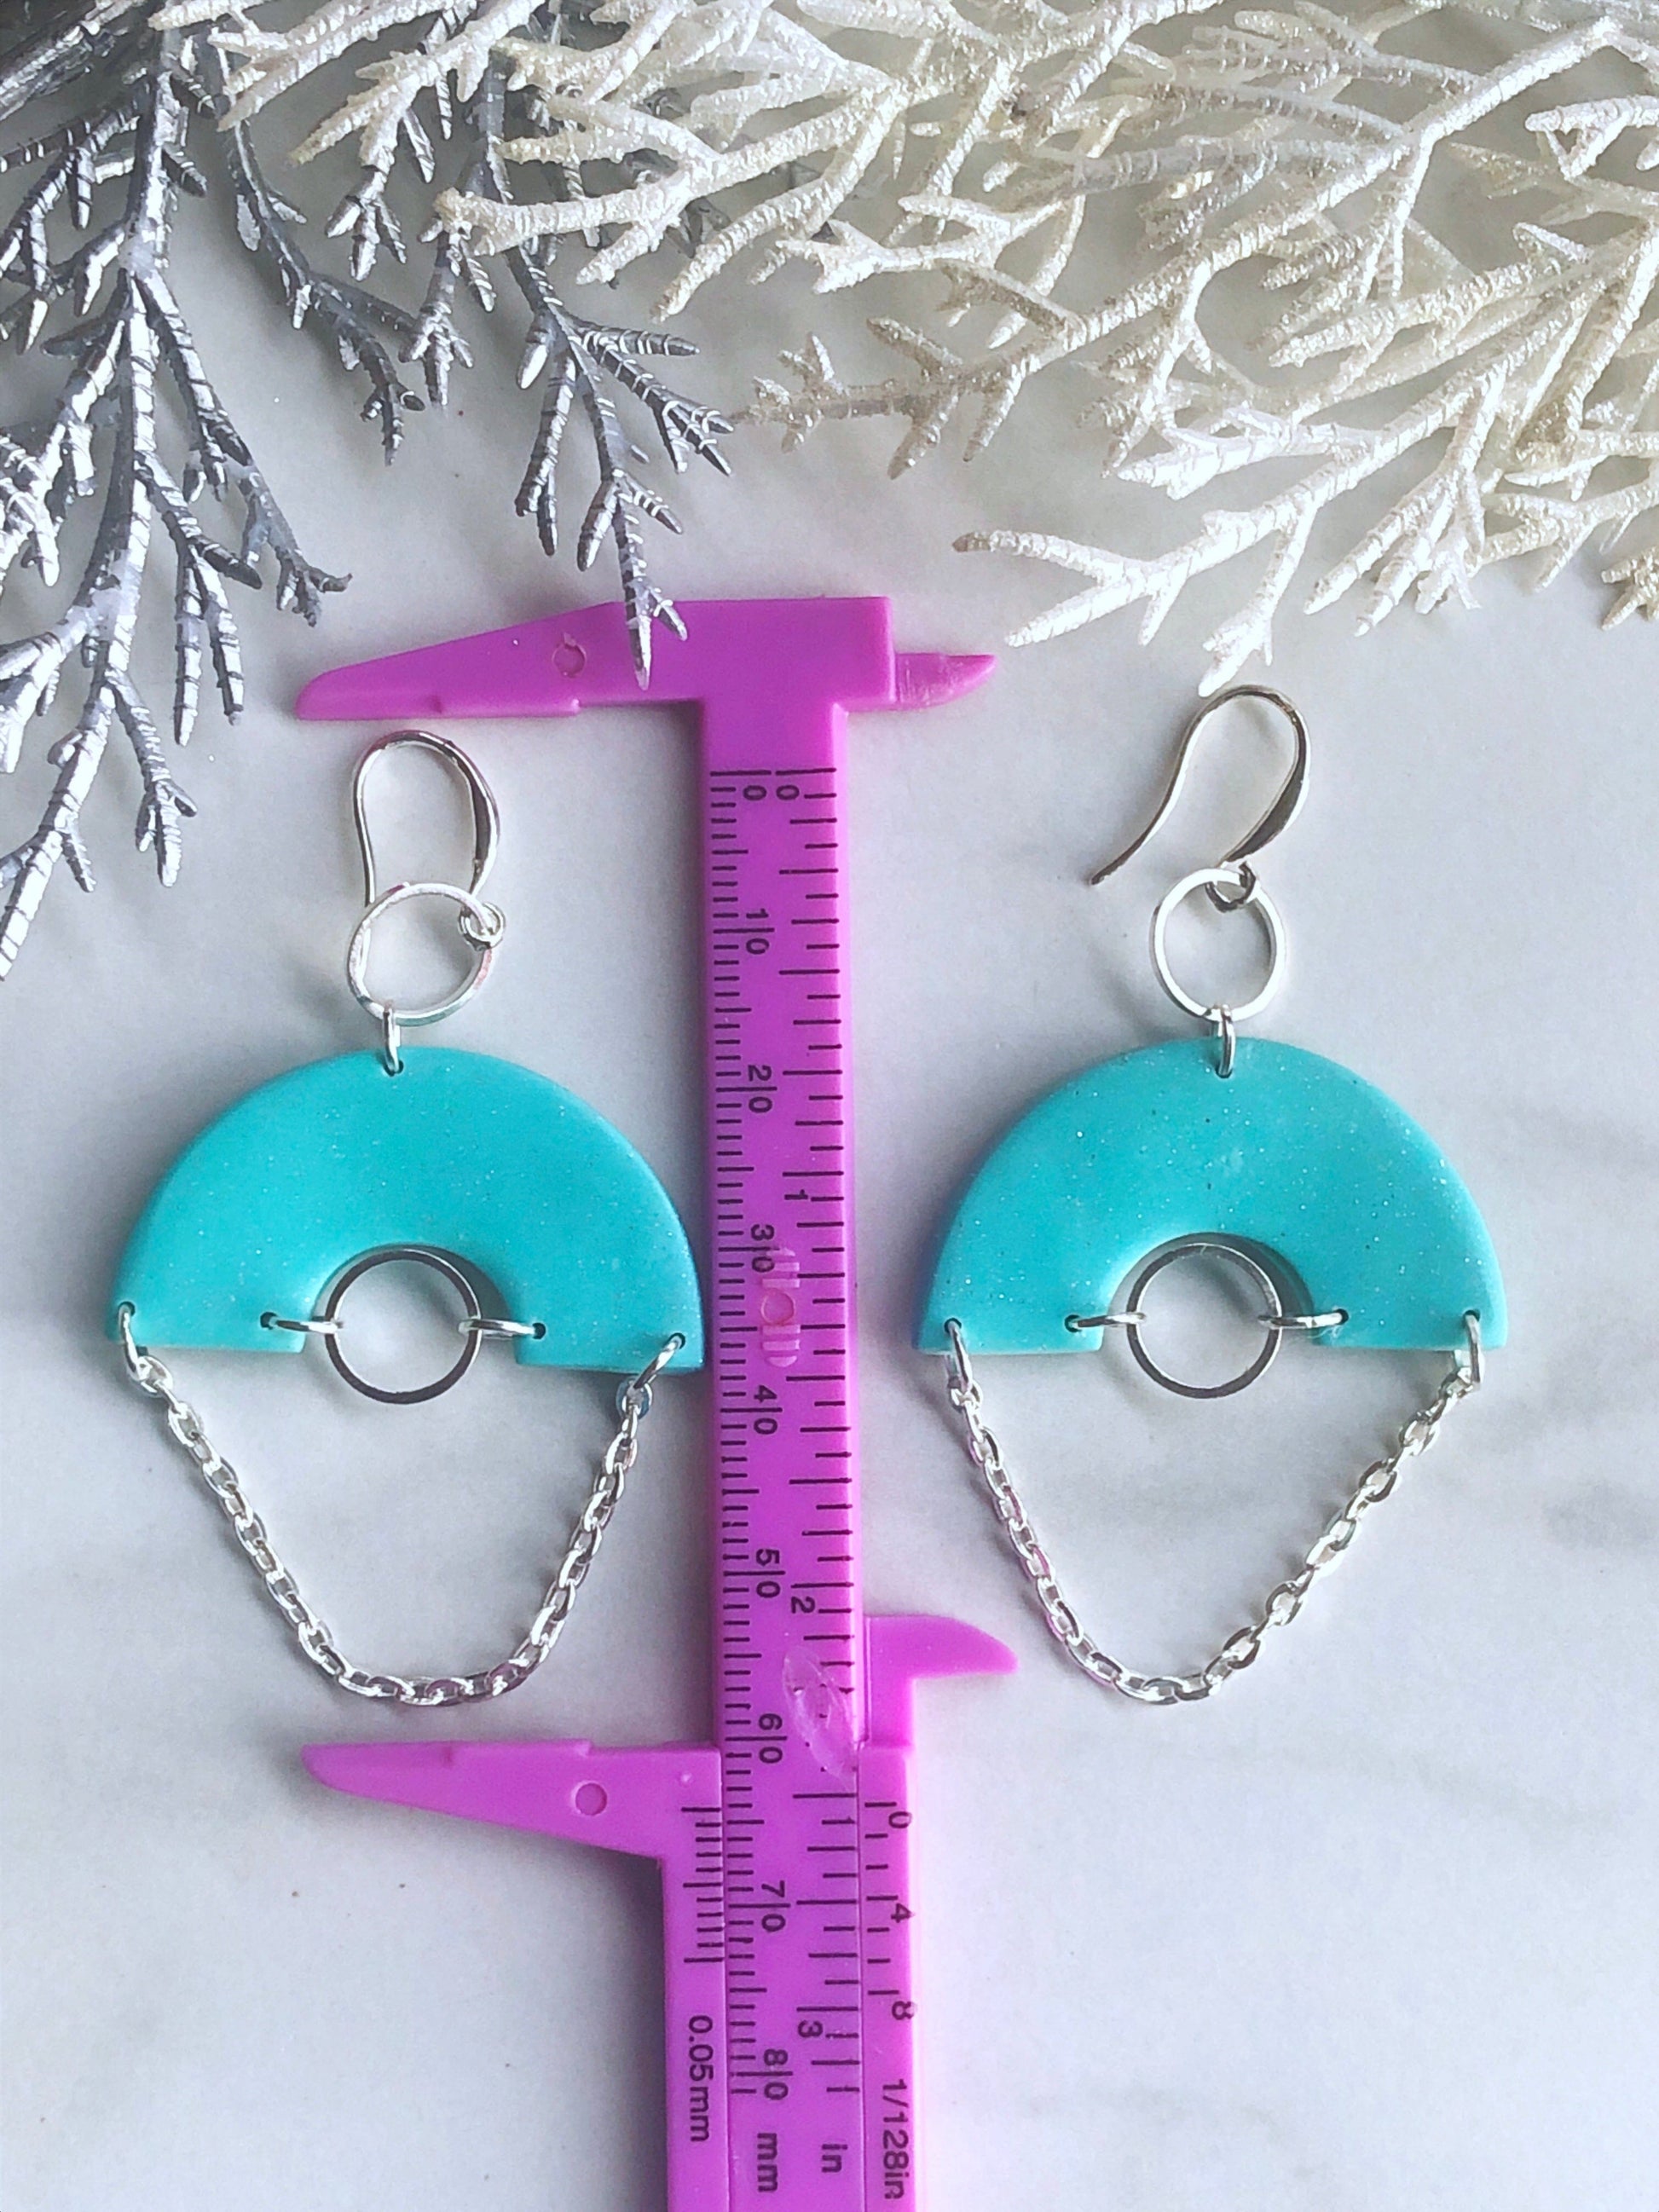 Earrings Aneira - Turquoise Clay Arch with Small Silver Circle Charm & Dangling Chain